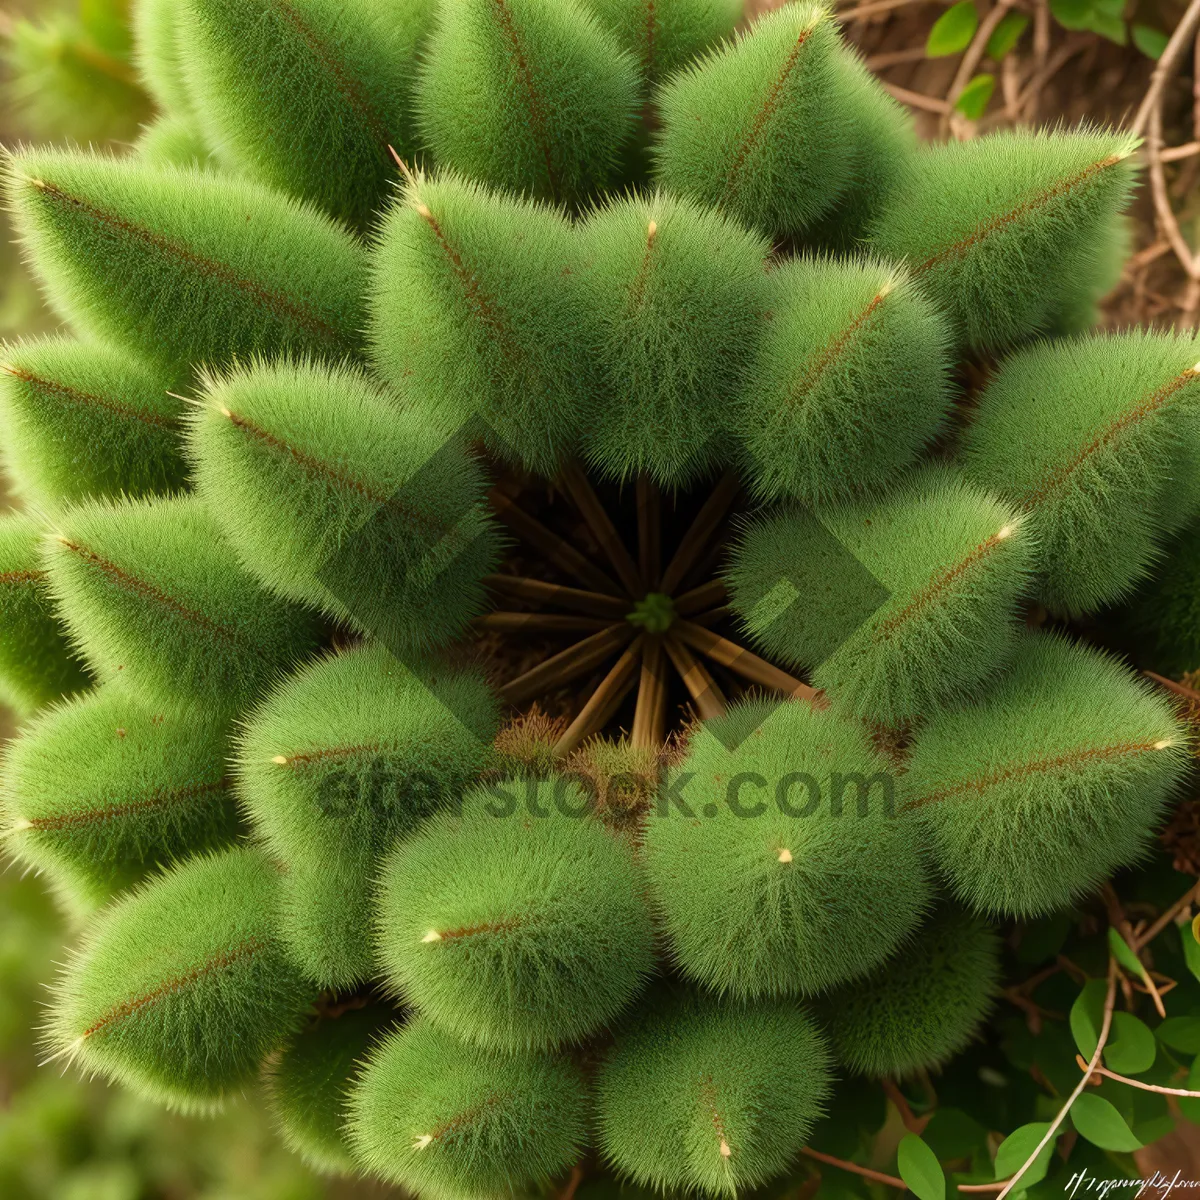 Picture of Prickly Desert Cactus with Edible Fruit